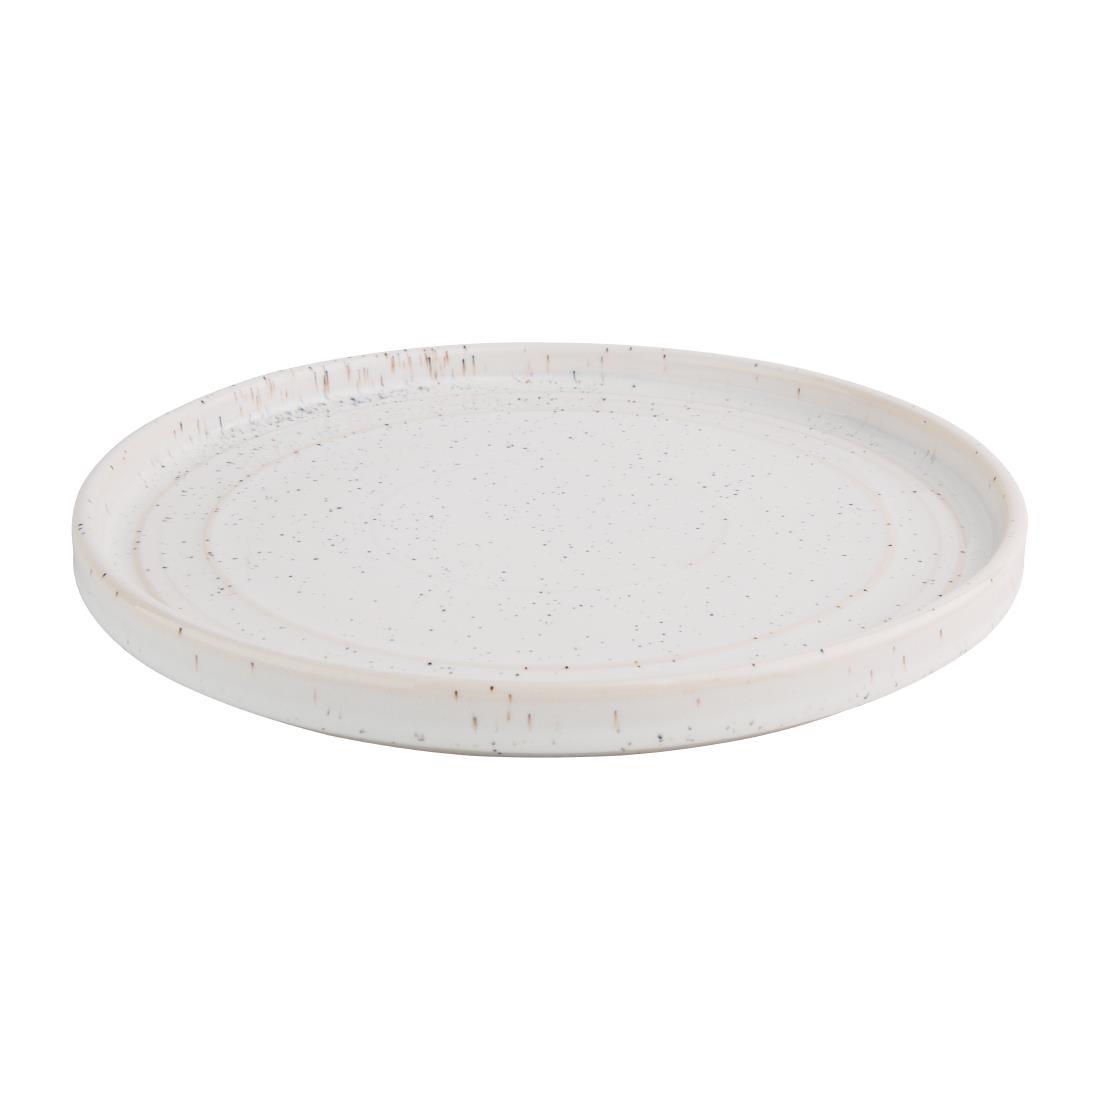 Olympia Cavolo Flat Round Plates White Speckle 220mm (Pack of 6) - FD903  - 2